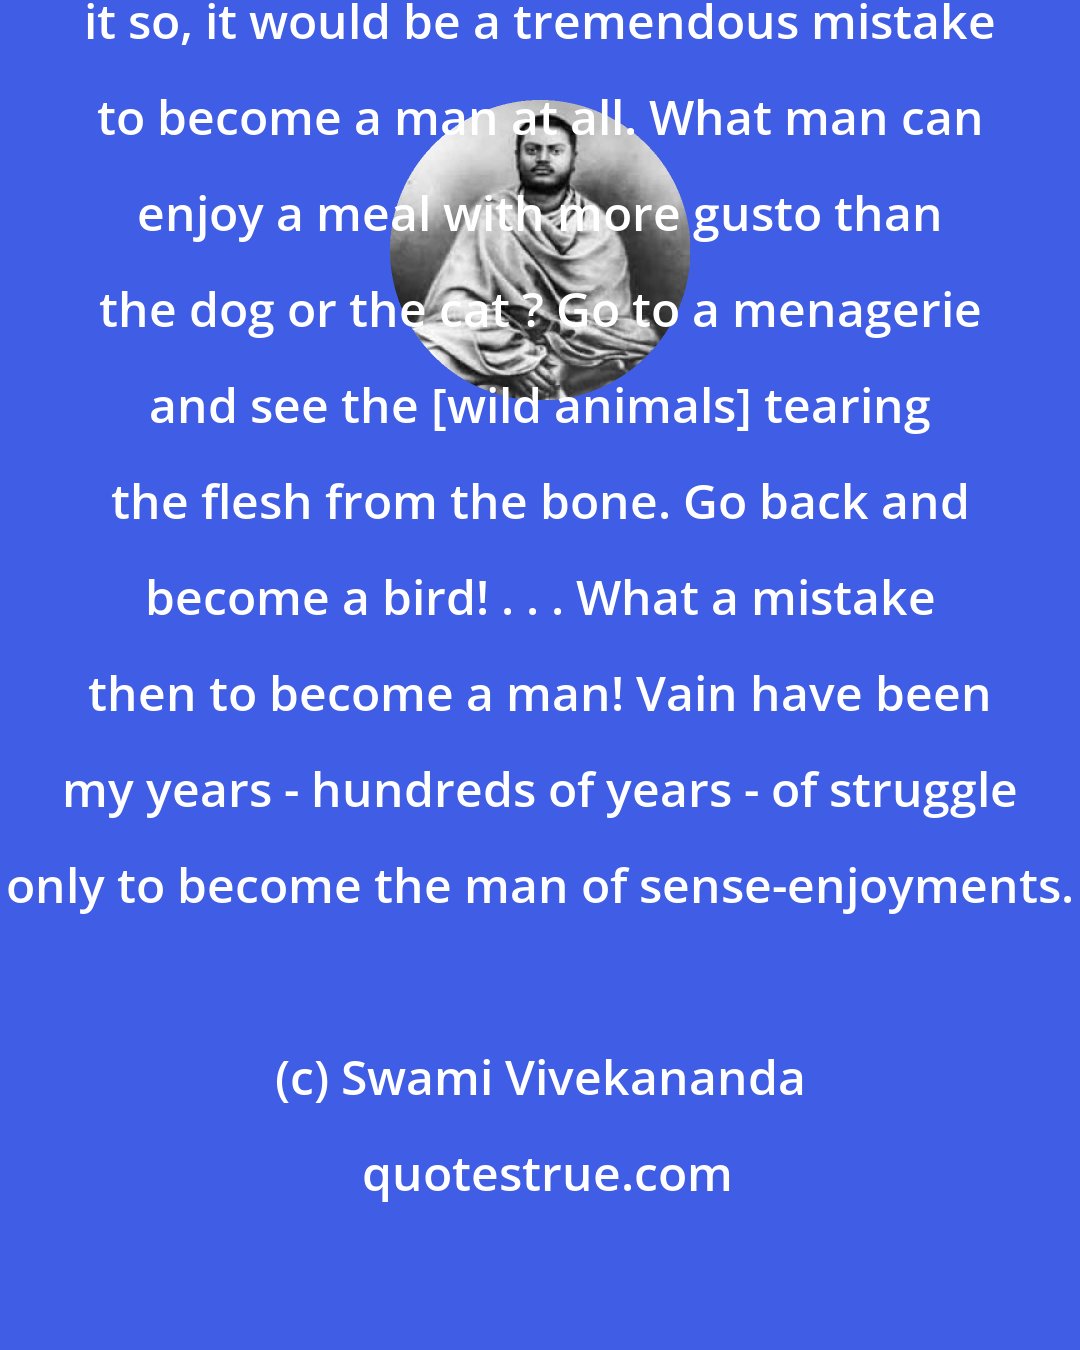 Swami Vivekananda: Is enjoyment the goal of life? Were it so, it would be a tremendous mistake to become a man at all. What man can enjoy a meal with more gusto than the dog or the cat ? Go to a menagerie and see the [wild animals] tearing the flesh from the bone. Go back and become a bird! . . . What a mistake then to become a man! Vain have been my years - hundreds of years - of struggle only to become the man of sense-enjoyments.